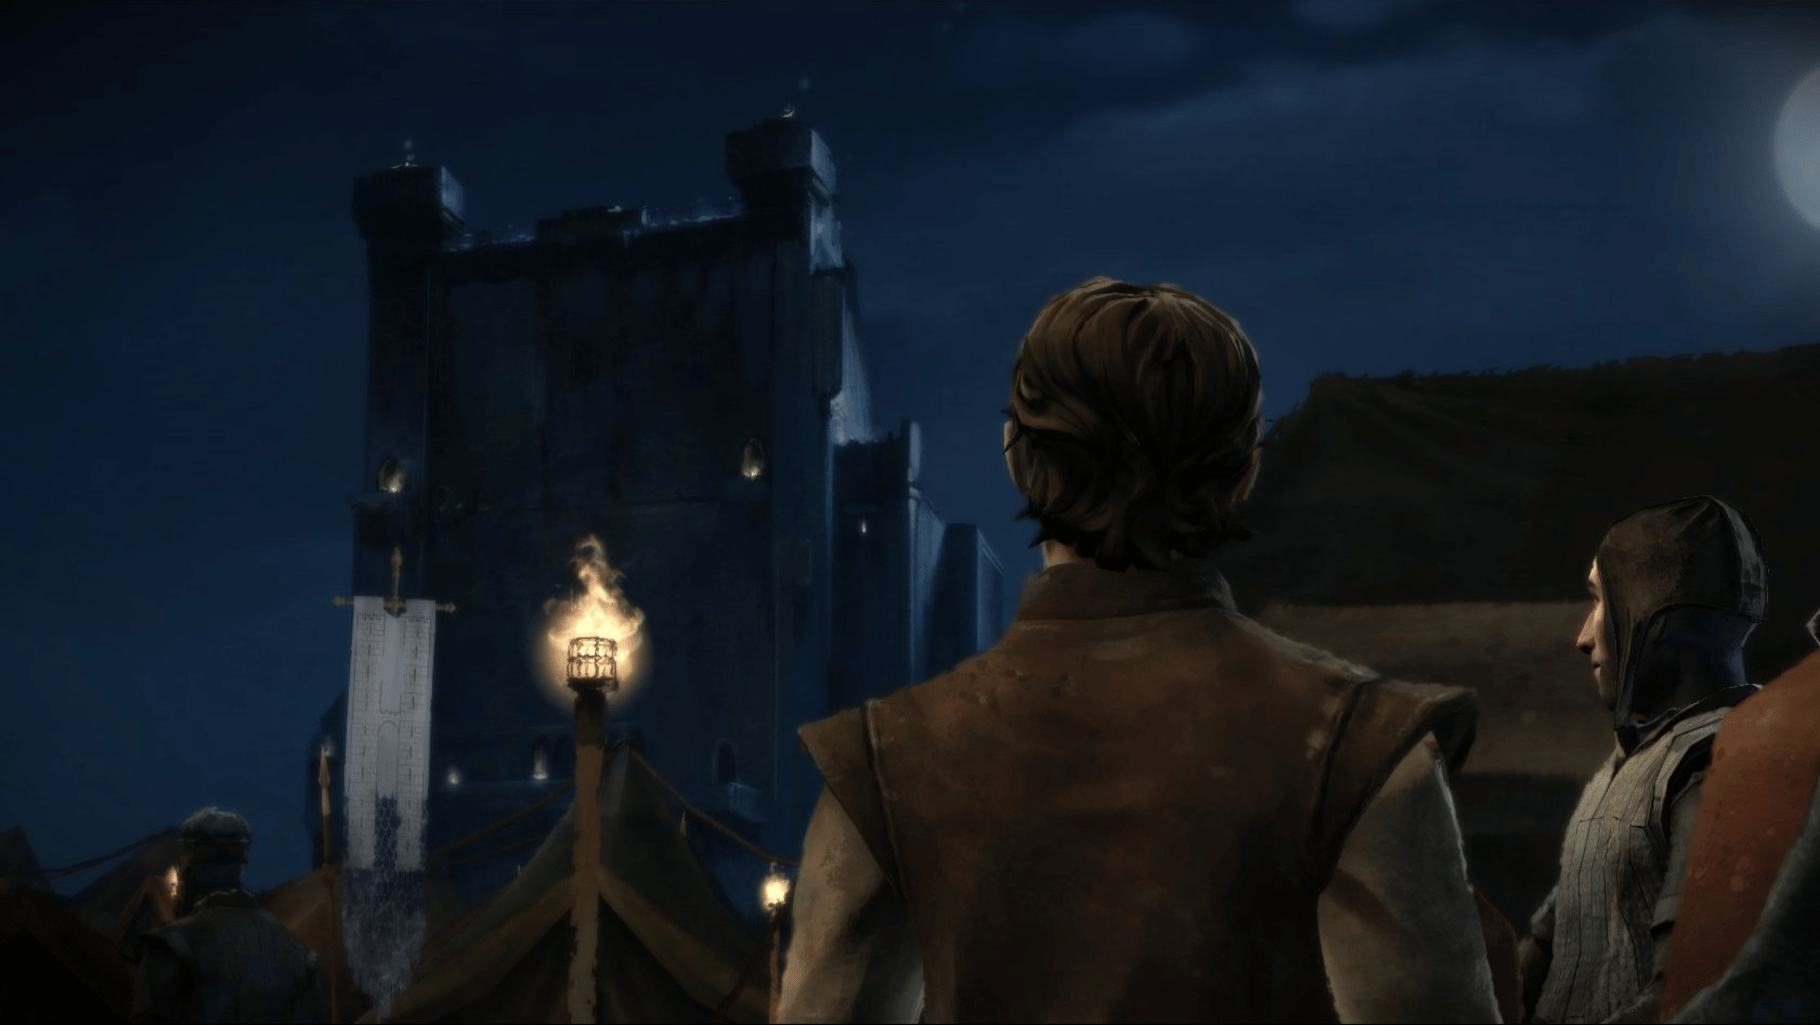 Game of Thrones: A Telltale Games Series - Episode 1: Iron From Ice screenshot